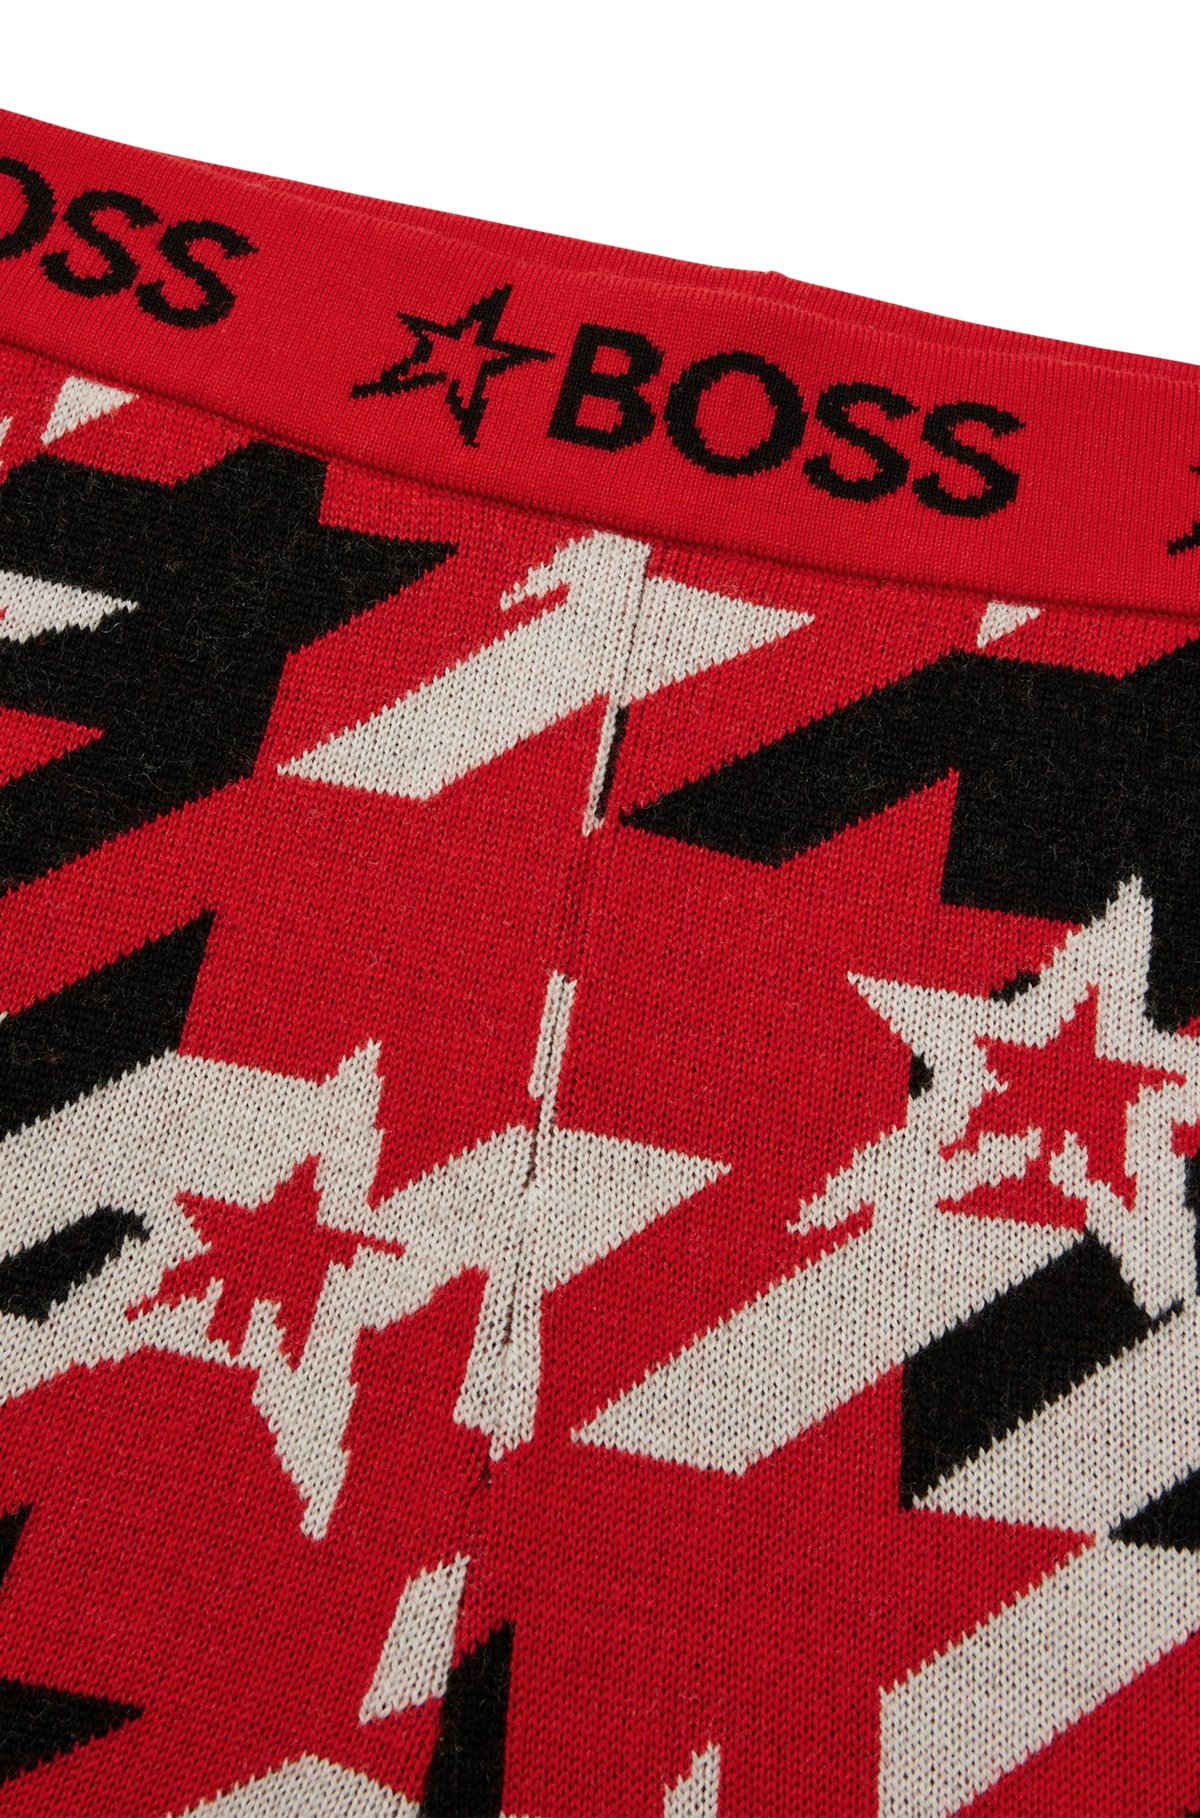 BOSS x Perfect Moment virgin-wool leggings with branding, Red Patterned